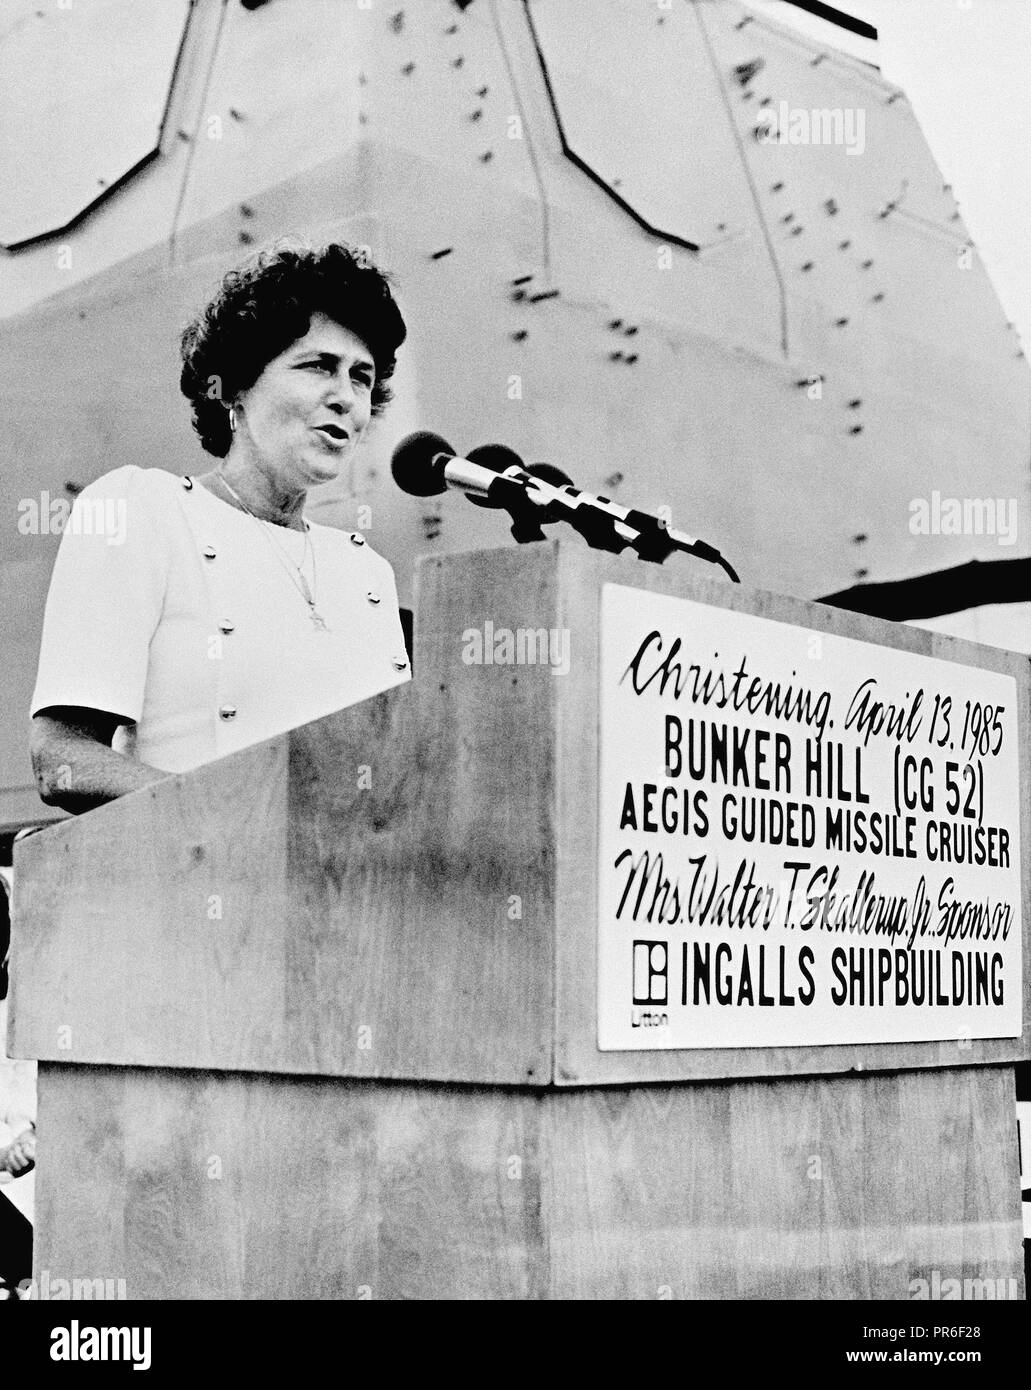 Rep. Beverly Byron, D-Maryland, and a member of the House Armed Services Committee, speaks during the christening of the guided missile cruiser USS BUNKER HILL (CG 52). Stock Photo